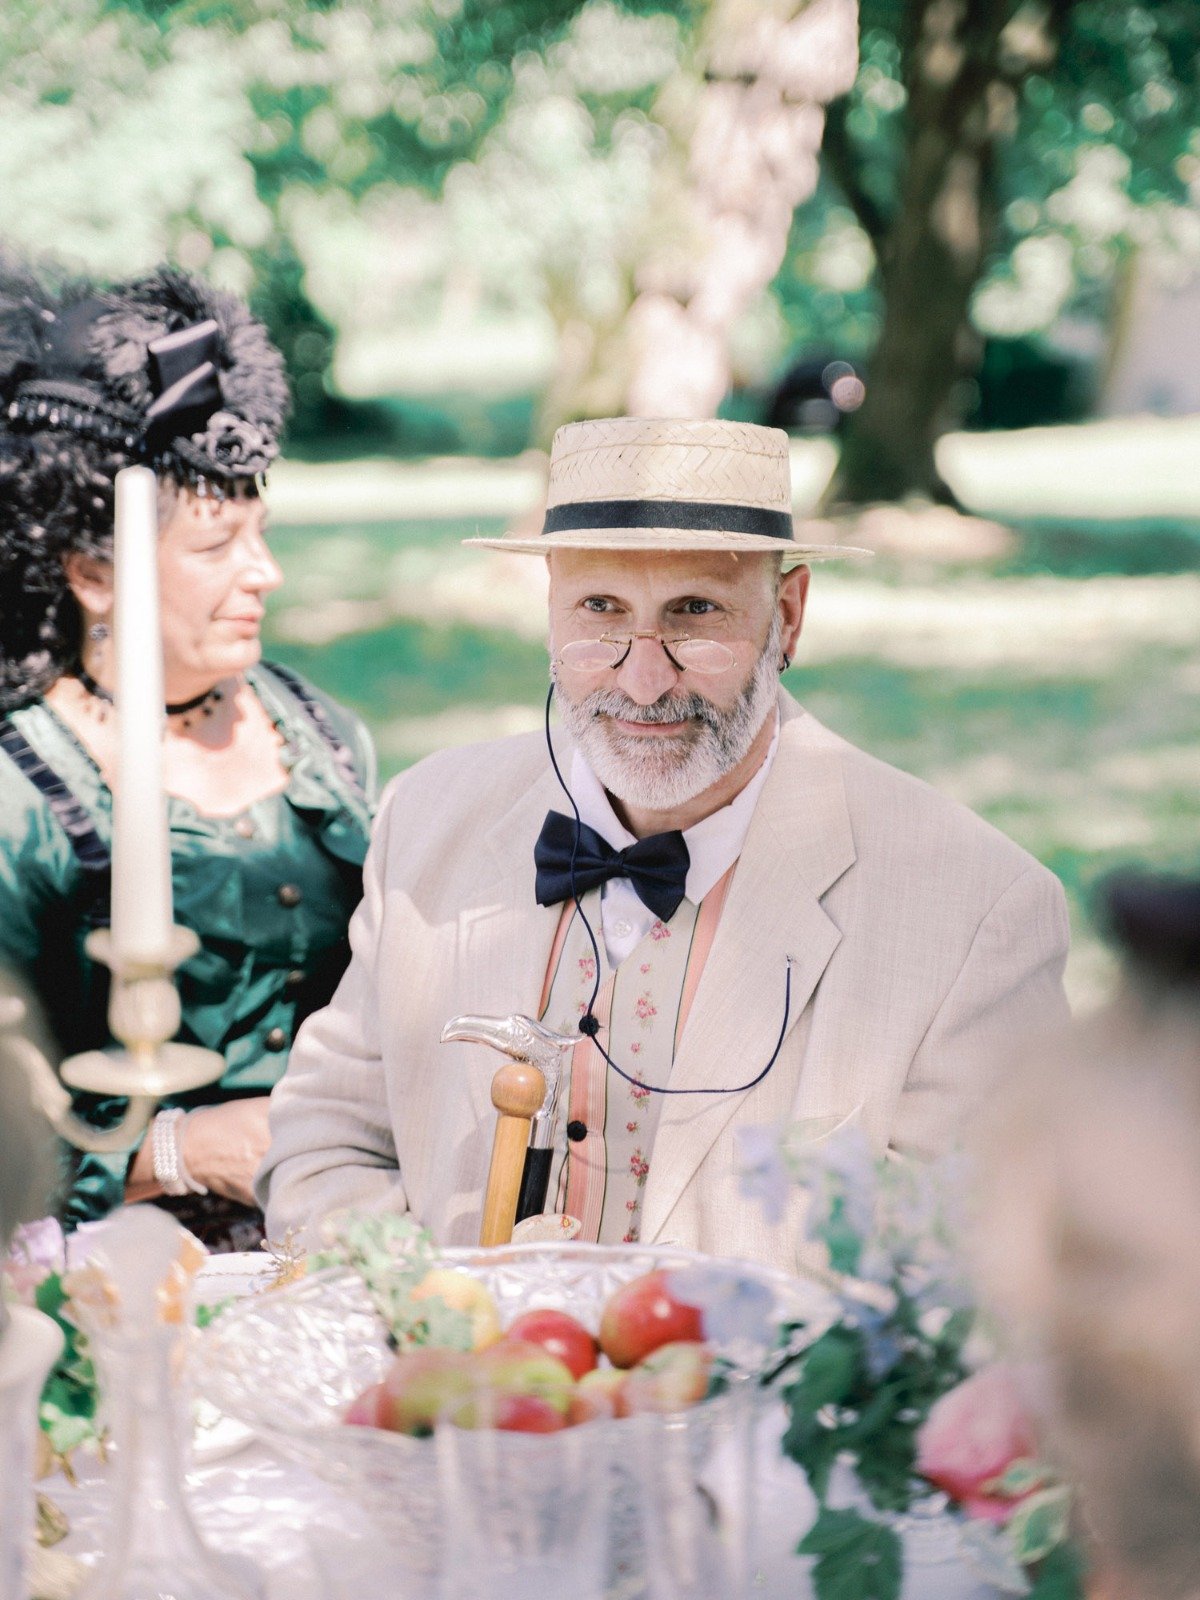 A 19th century chateau garden and wedding party in Occitanie